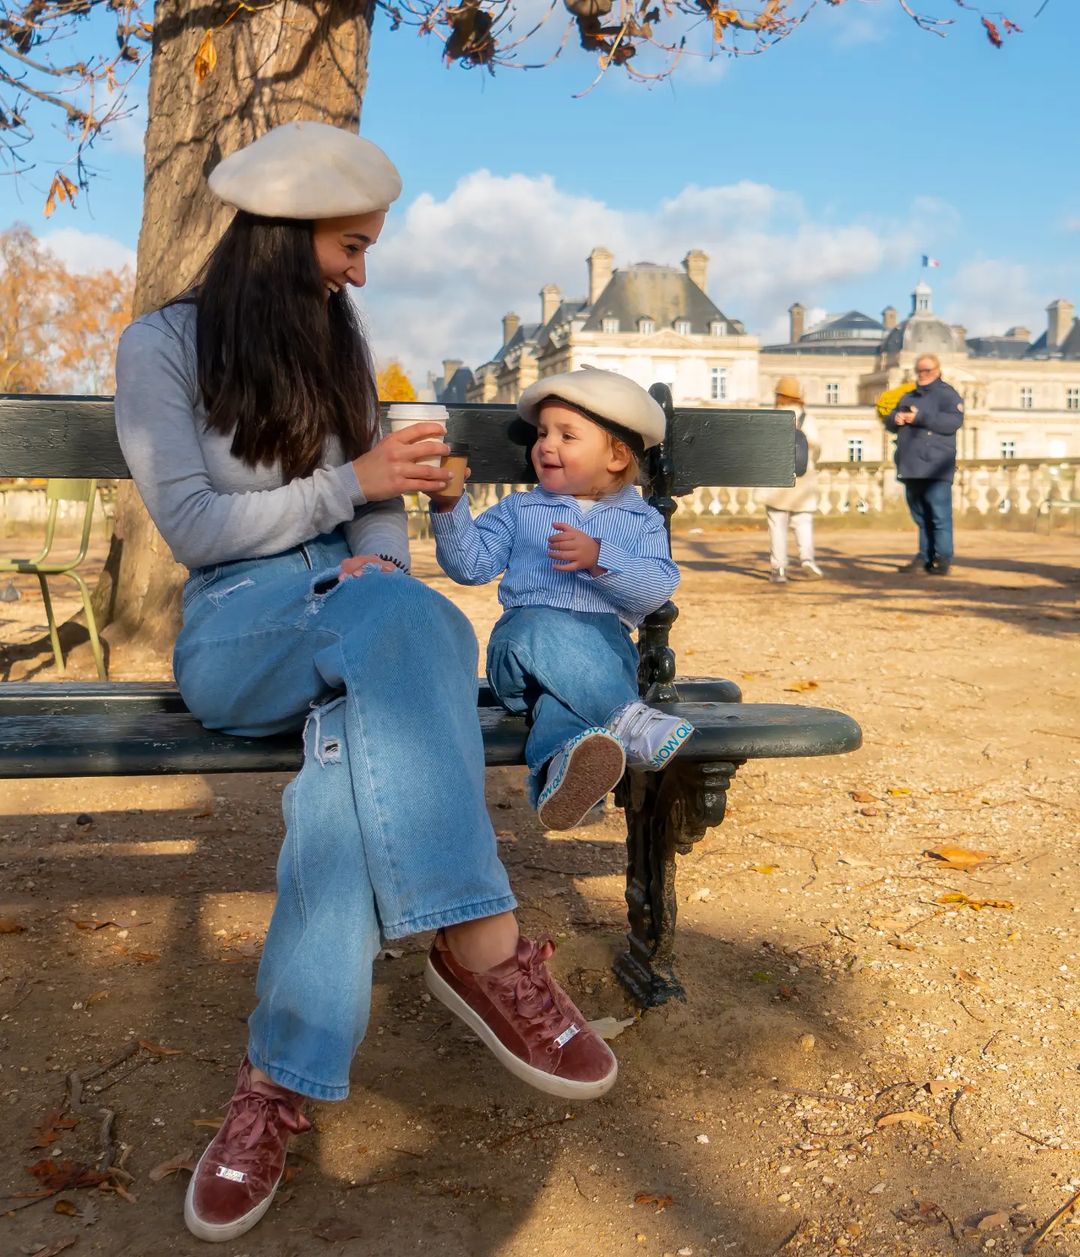 Mother and son wearing matching outfits with blue jeans, blue long-sleeve shirts, and white berets while in sitting on a park bench in Paris | Photo by Instagram user @rindalaakl